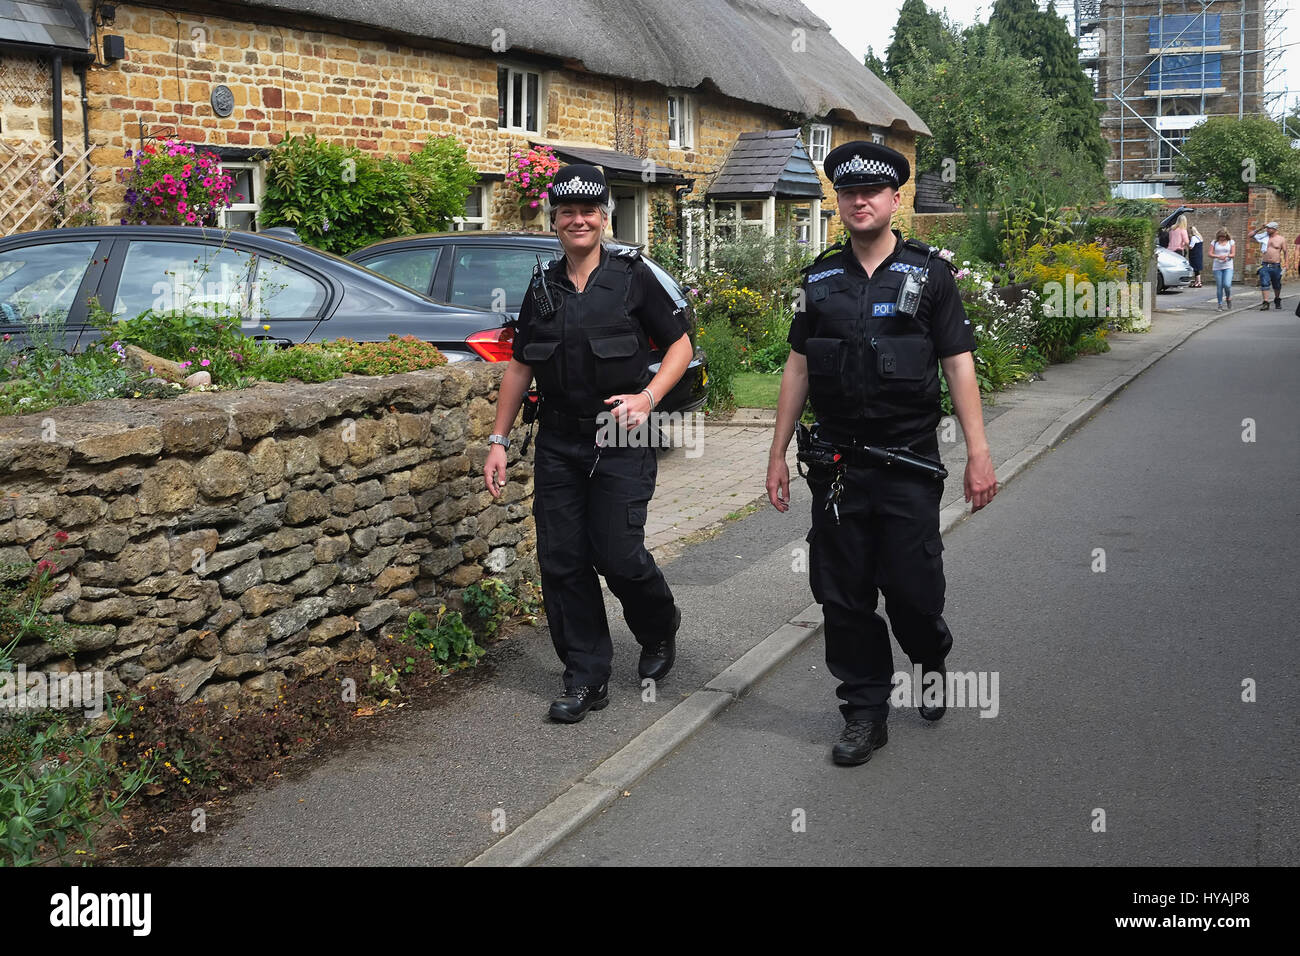 Law & Order, Police, Thames Valley officers walking the beat. Stock Photo